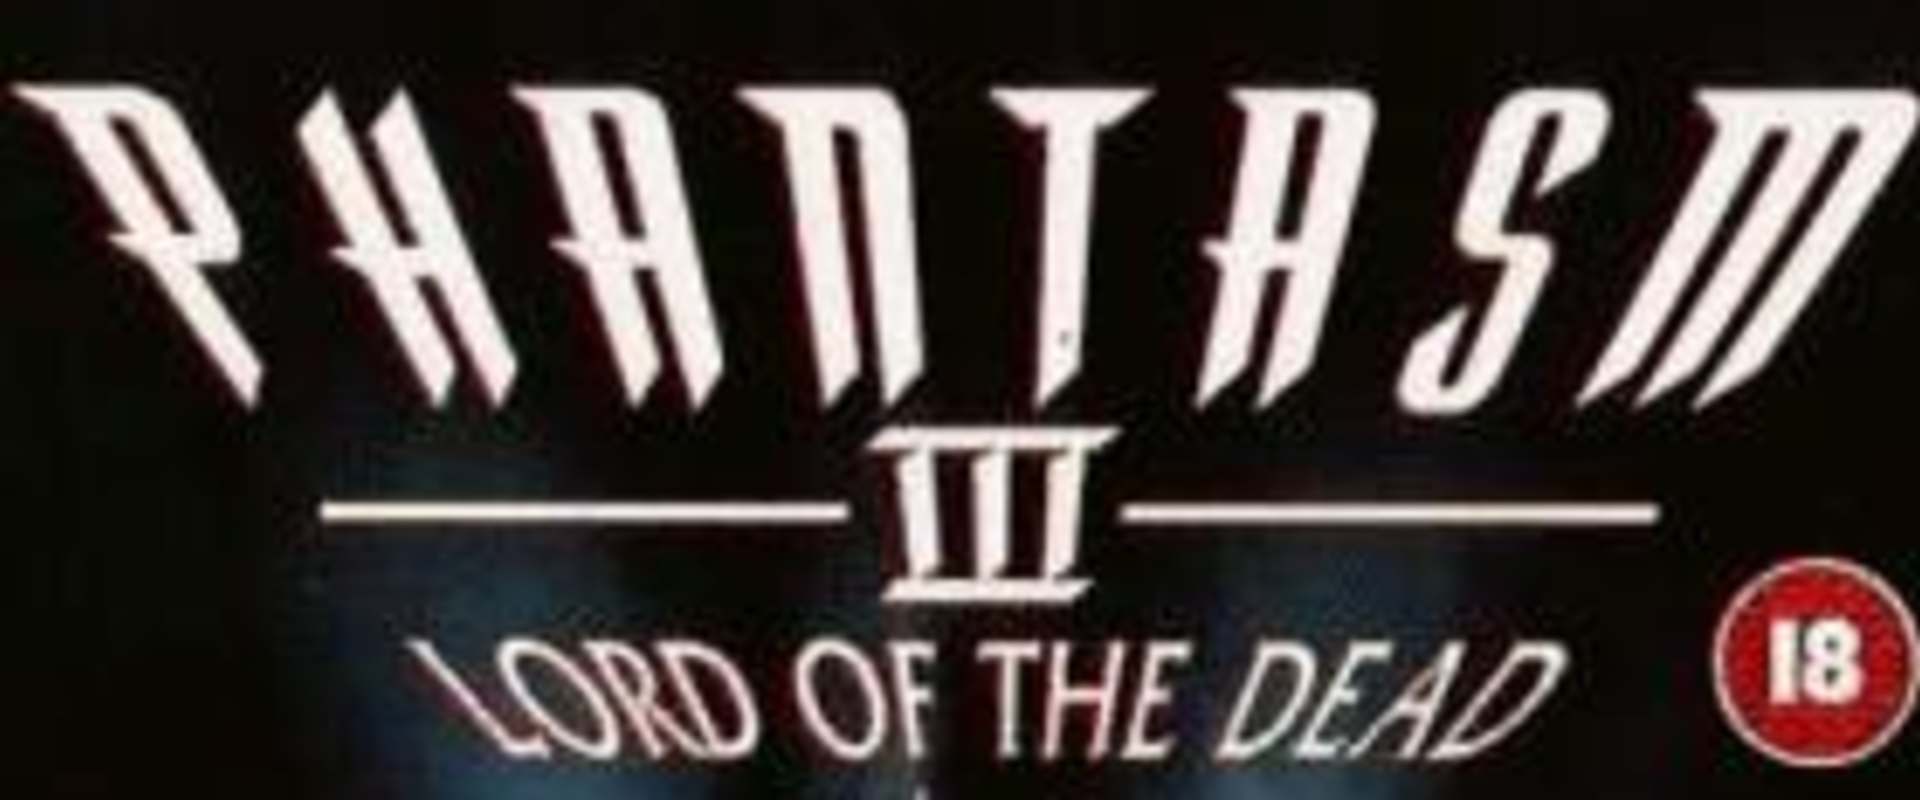 Phantasm III: Lord of the Dead background 1